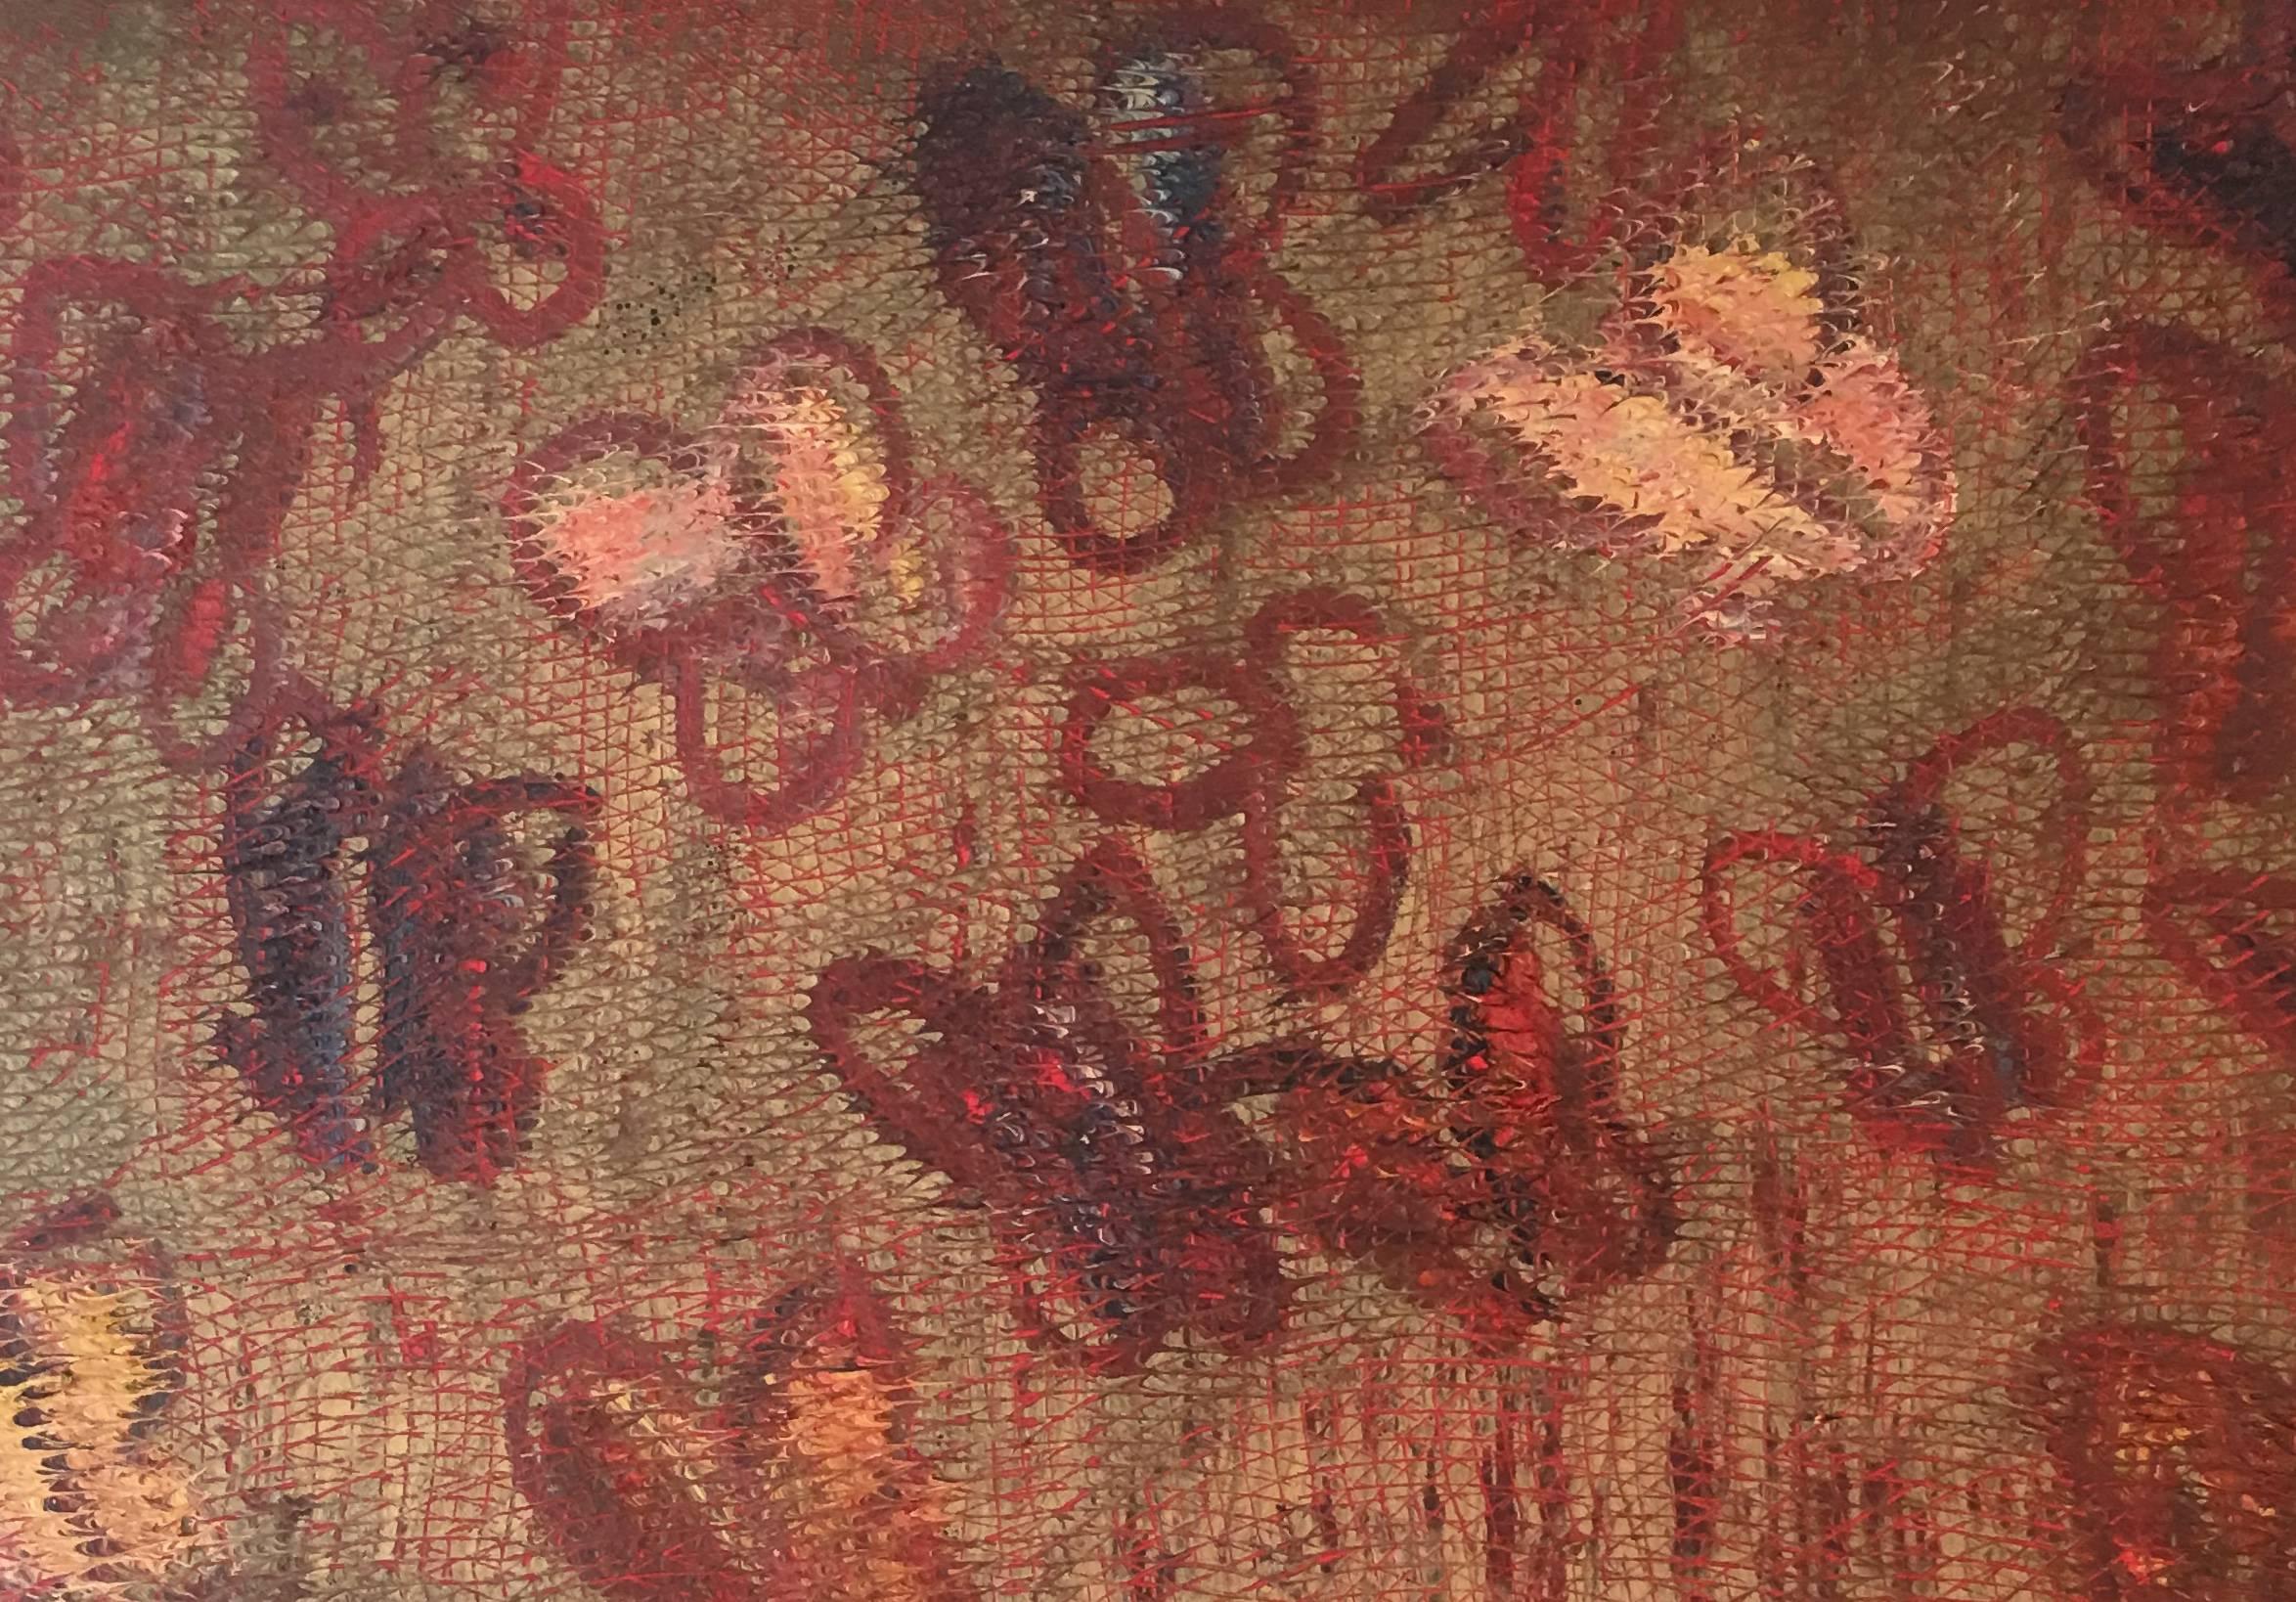 Glorious large-scale painting of butterflies in gold and red by American artist Hunt Slonem. The ground features the expressionist hatch work that is a Slonem signature. Signed, titled and dated 2001 on reverse.